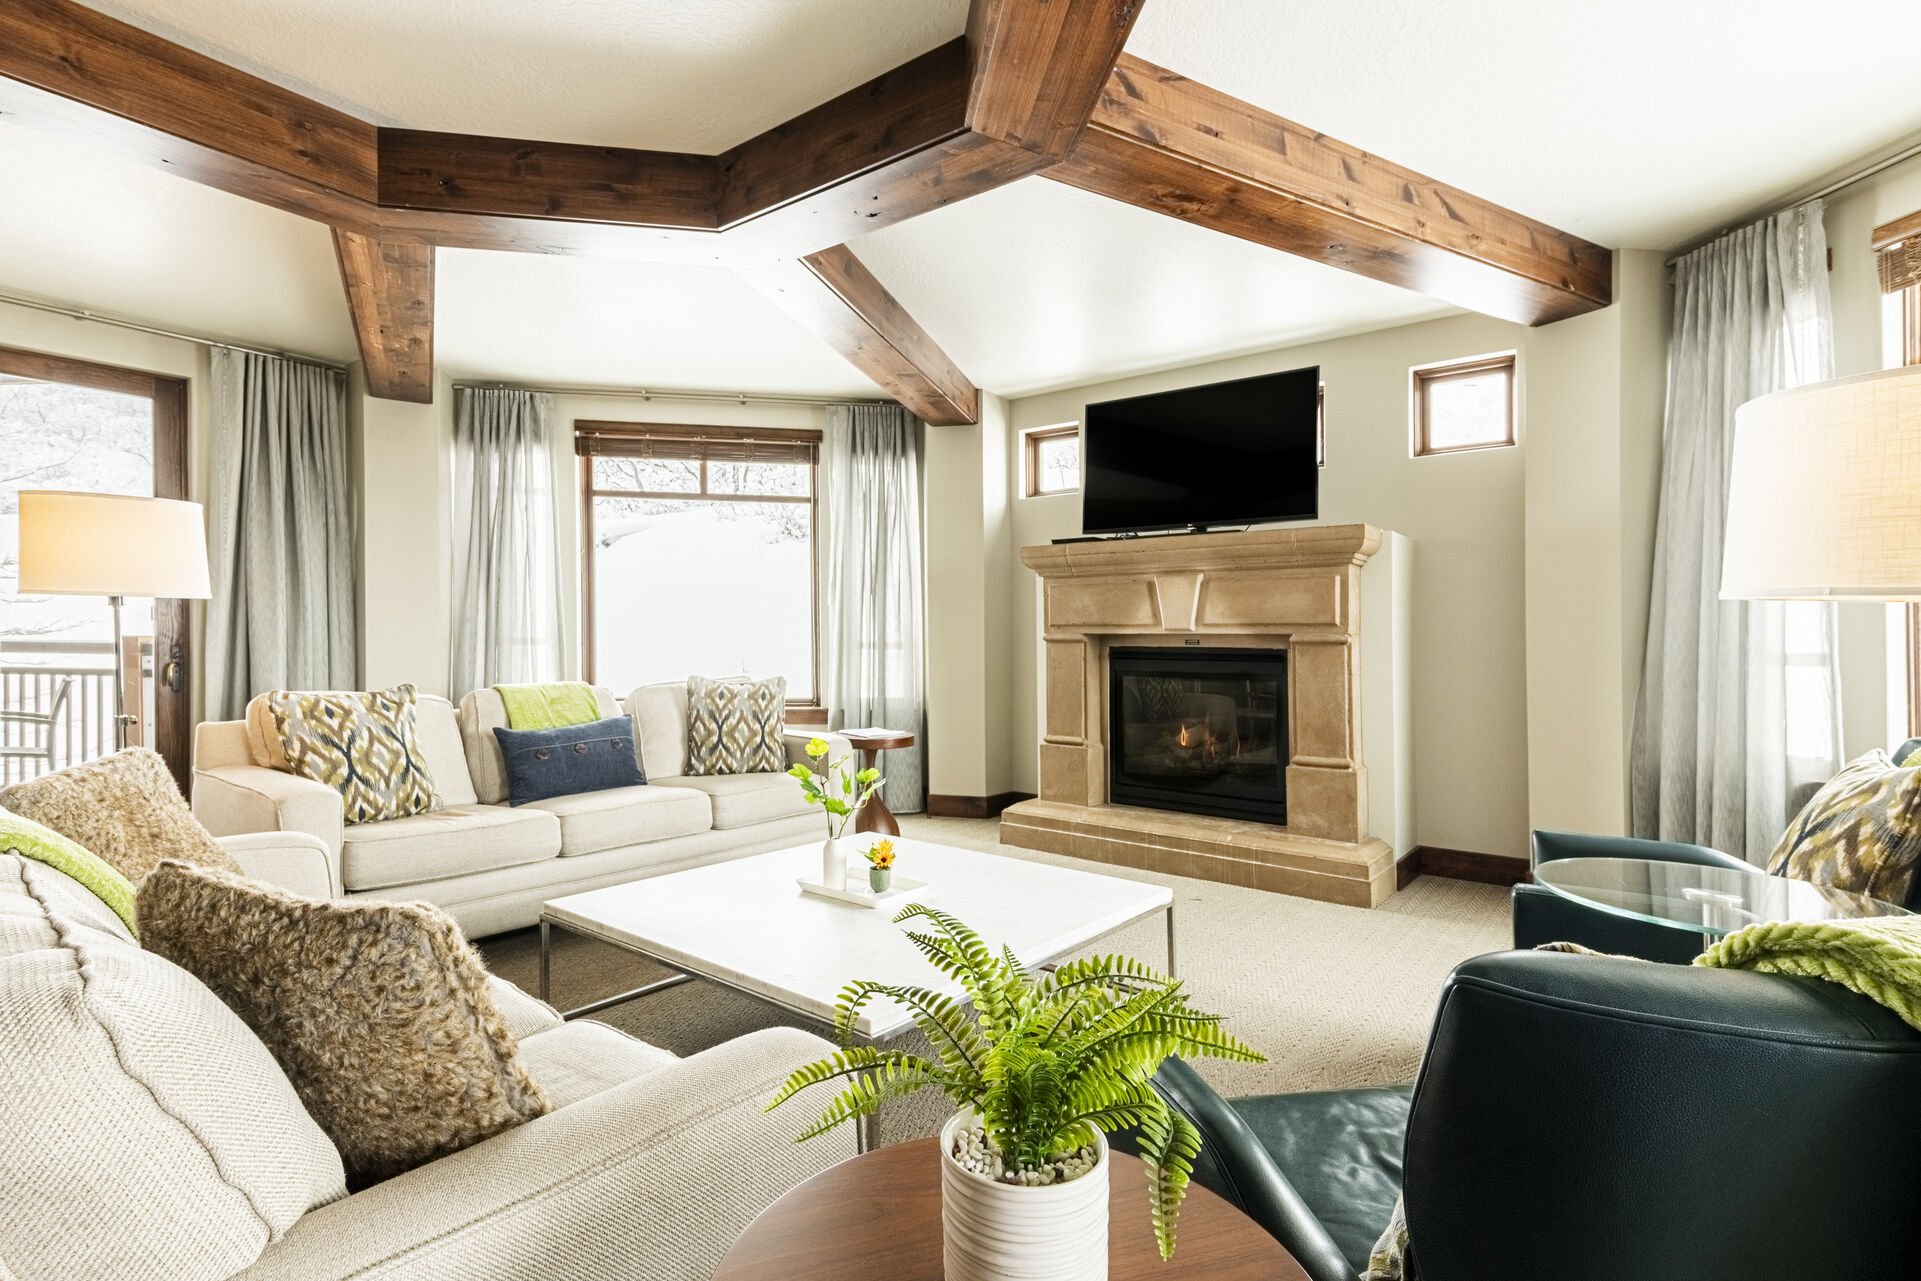 Living area with a gas fireplace, a Smart TV and balcony access